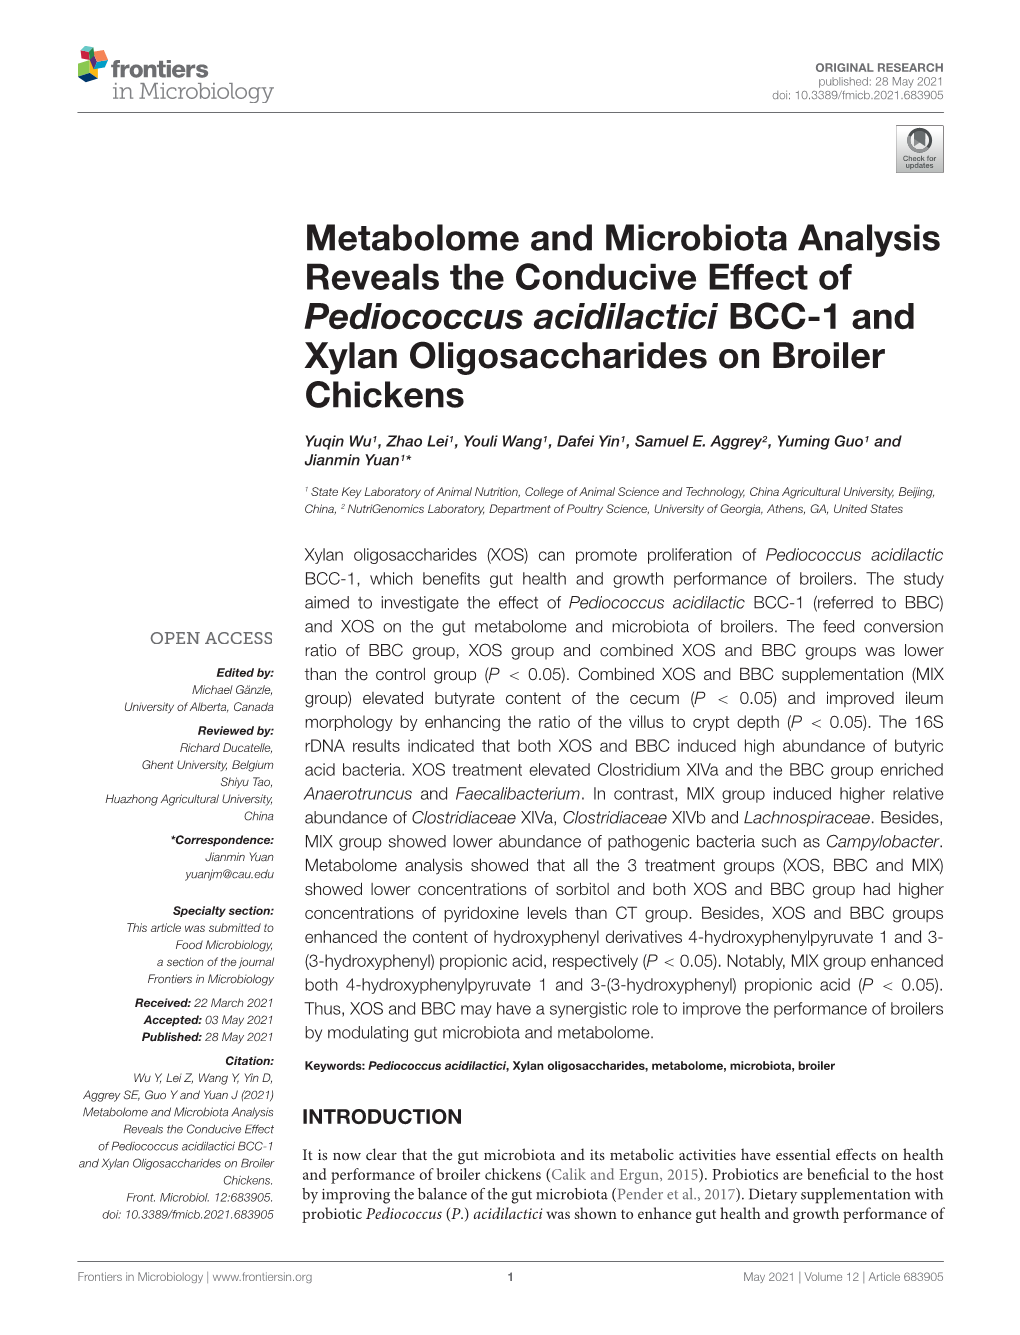 Metabolome and Microbiota Analysis Reveals the Conducive Effect of Pediococcus Acidilactici BCC-1 and Xylan Oligosaccharides on Broiler Chickens